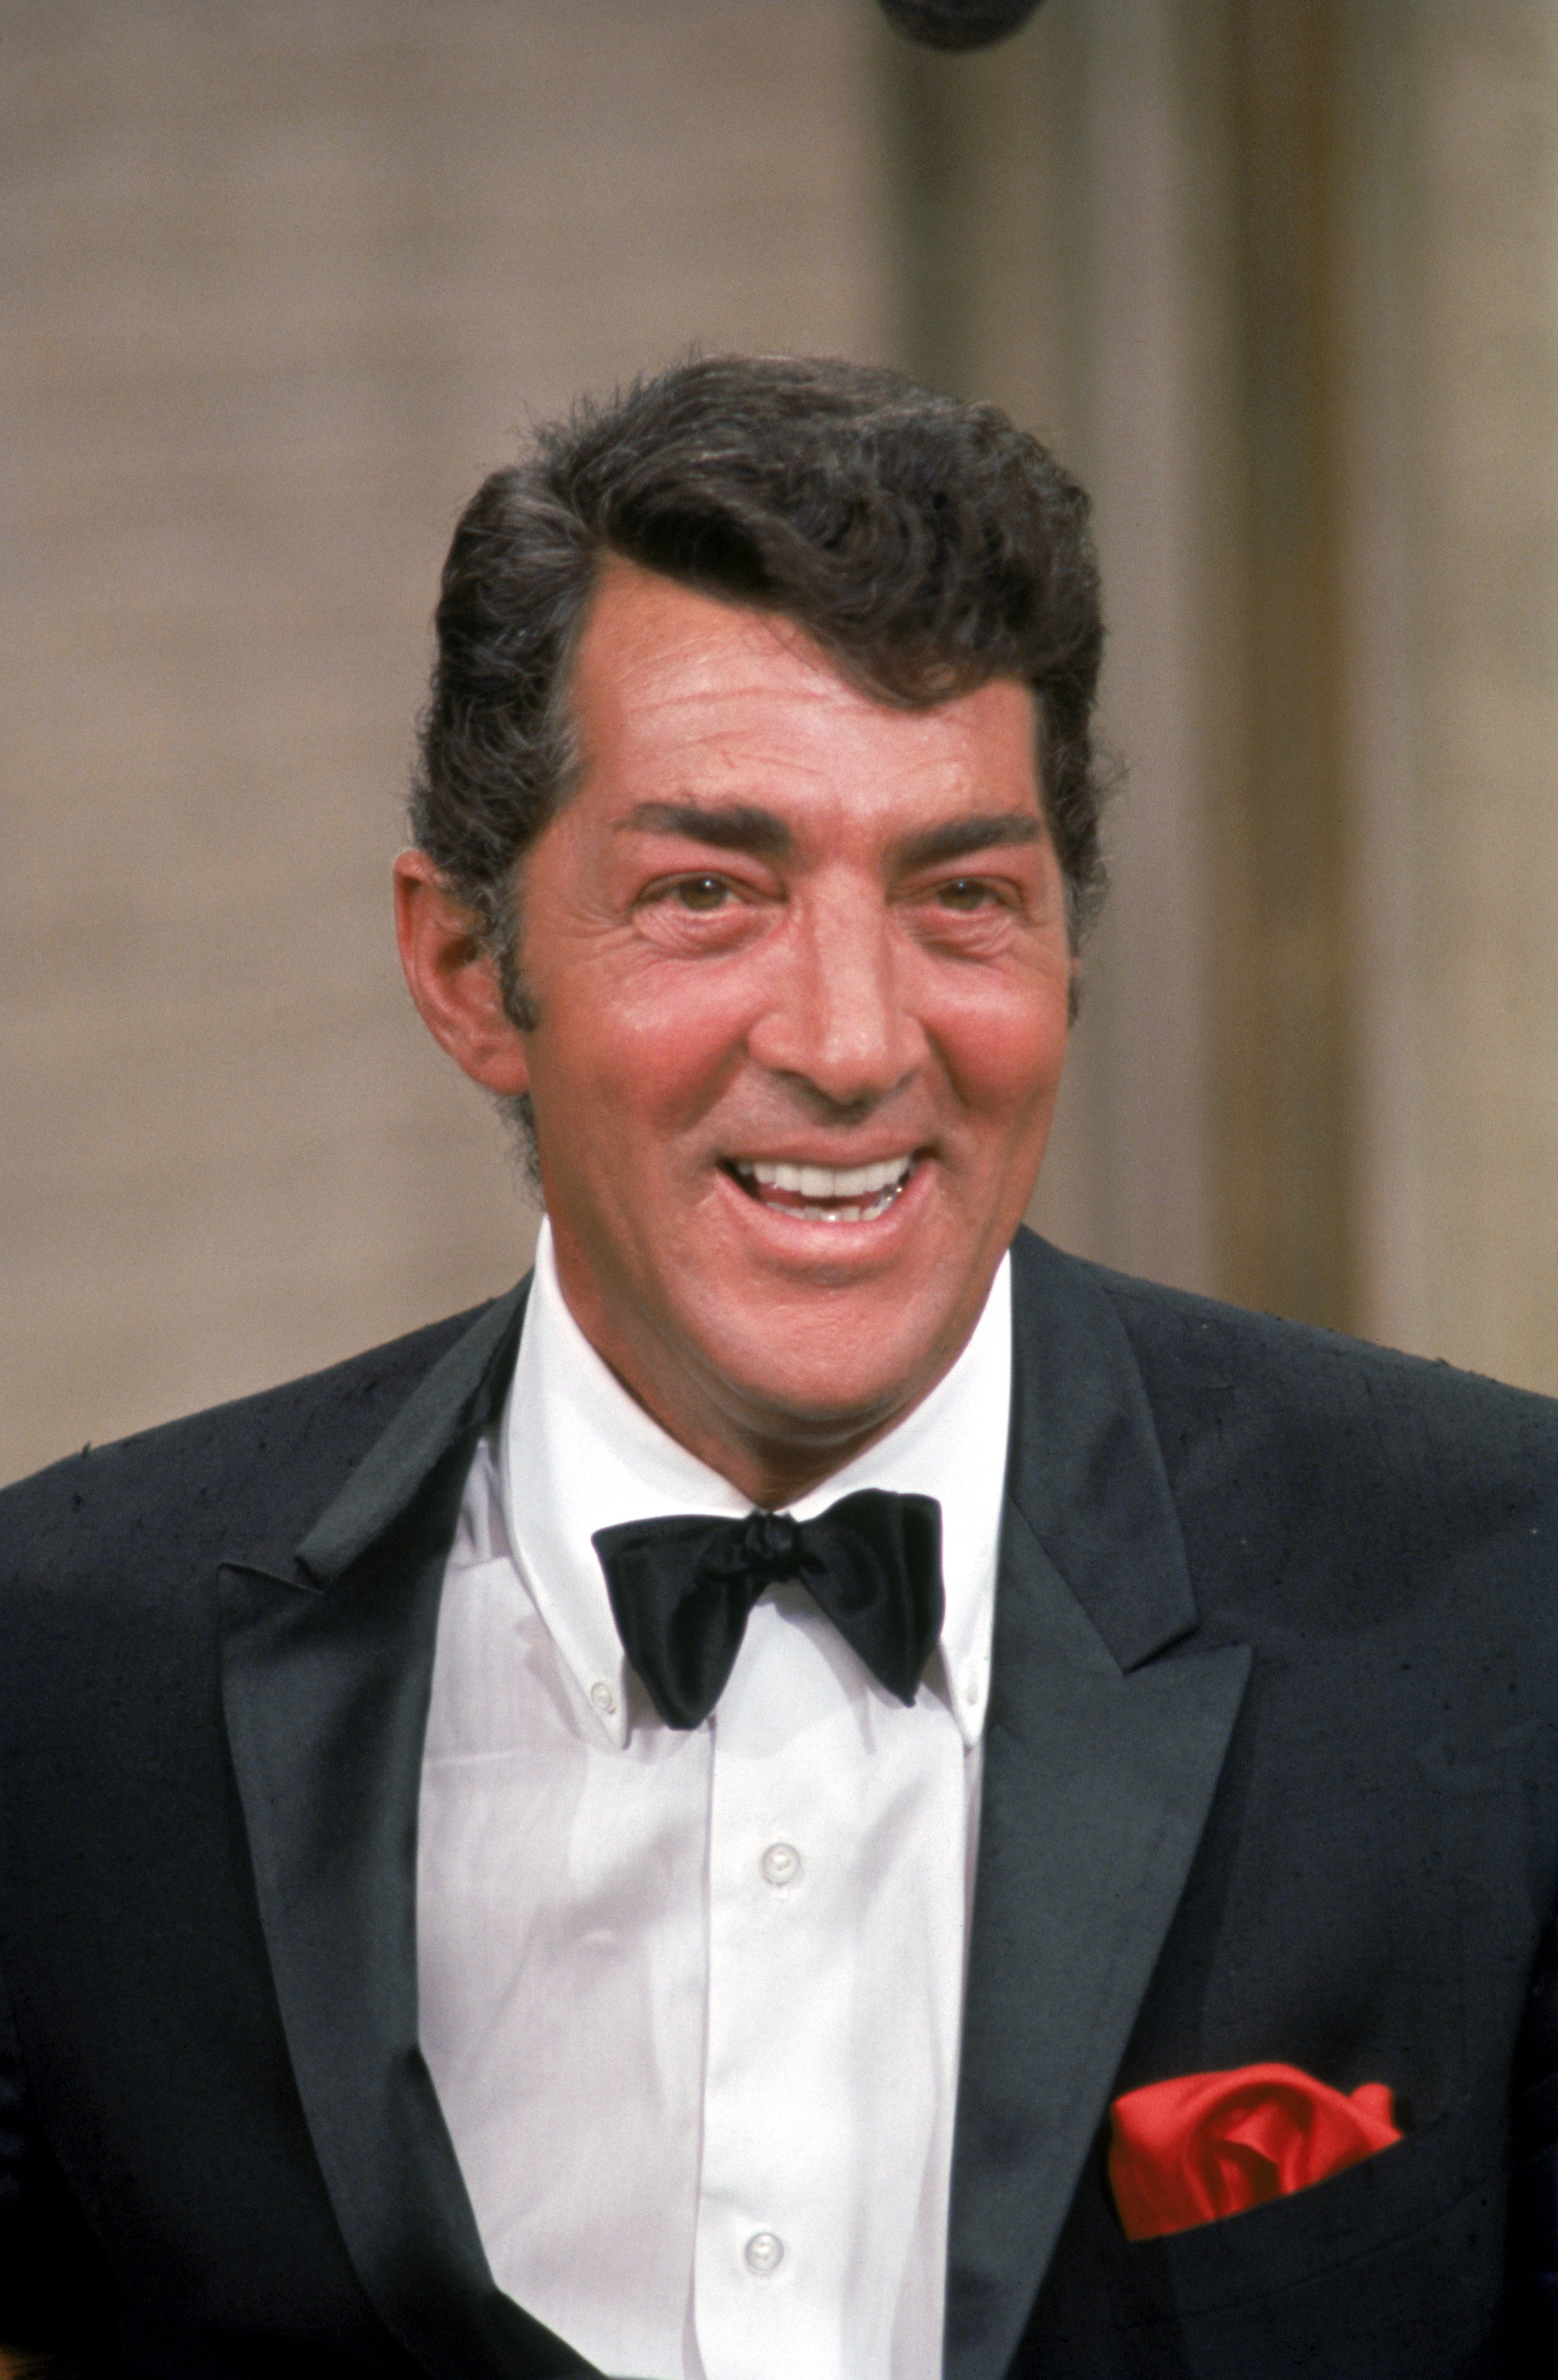 Dean Martin on the set during filming of "The Dean Martin show" in 1967. | Photo: Getty Images